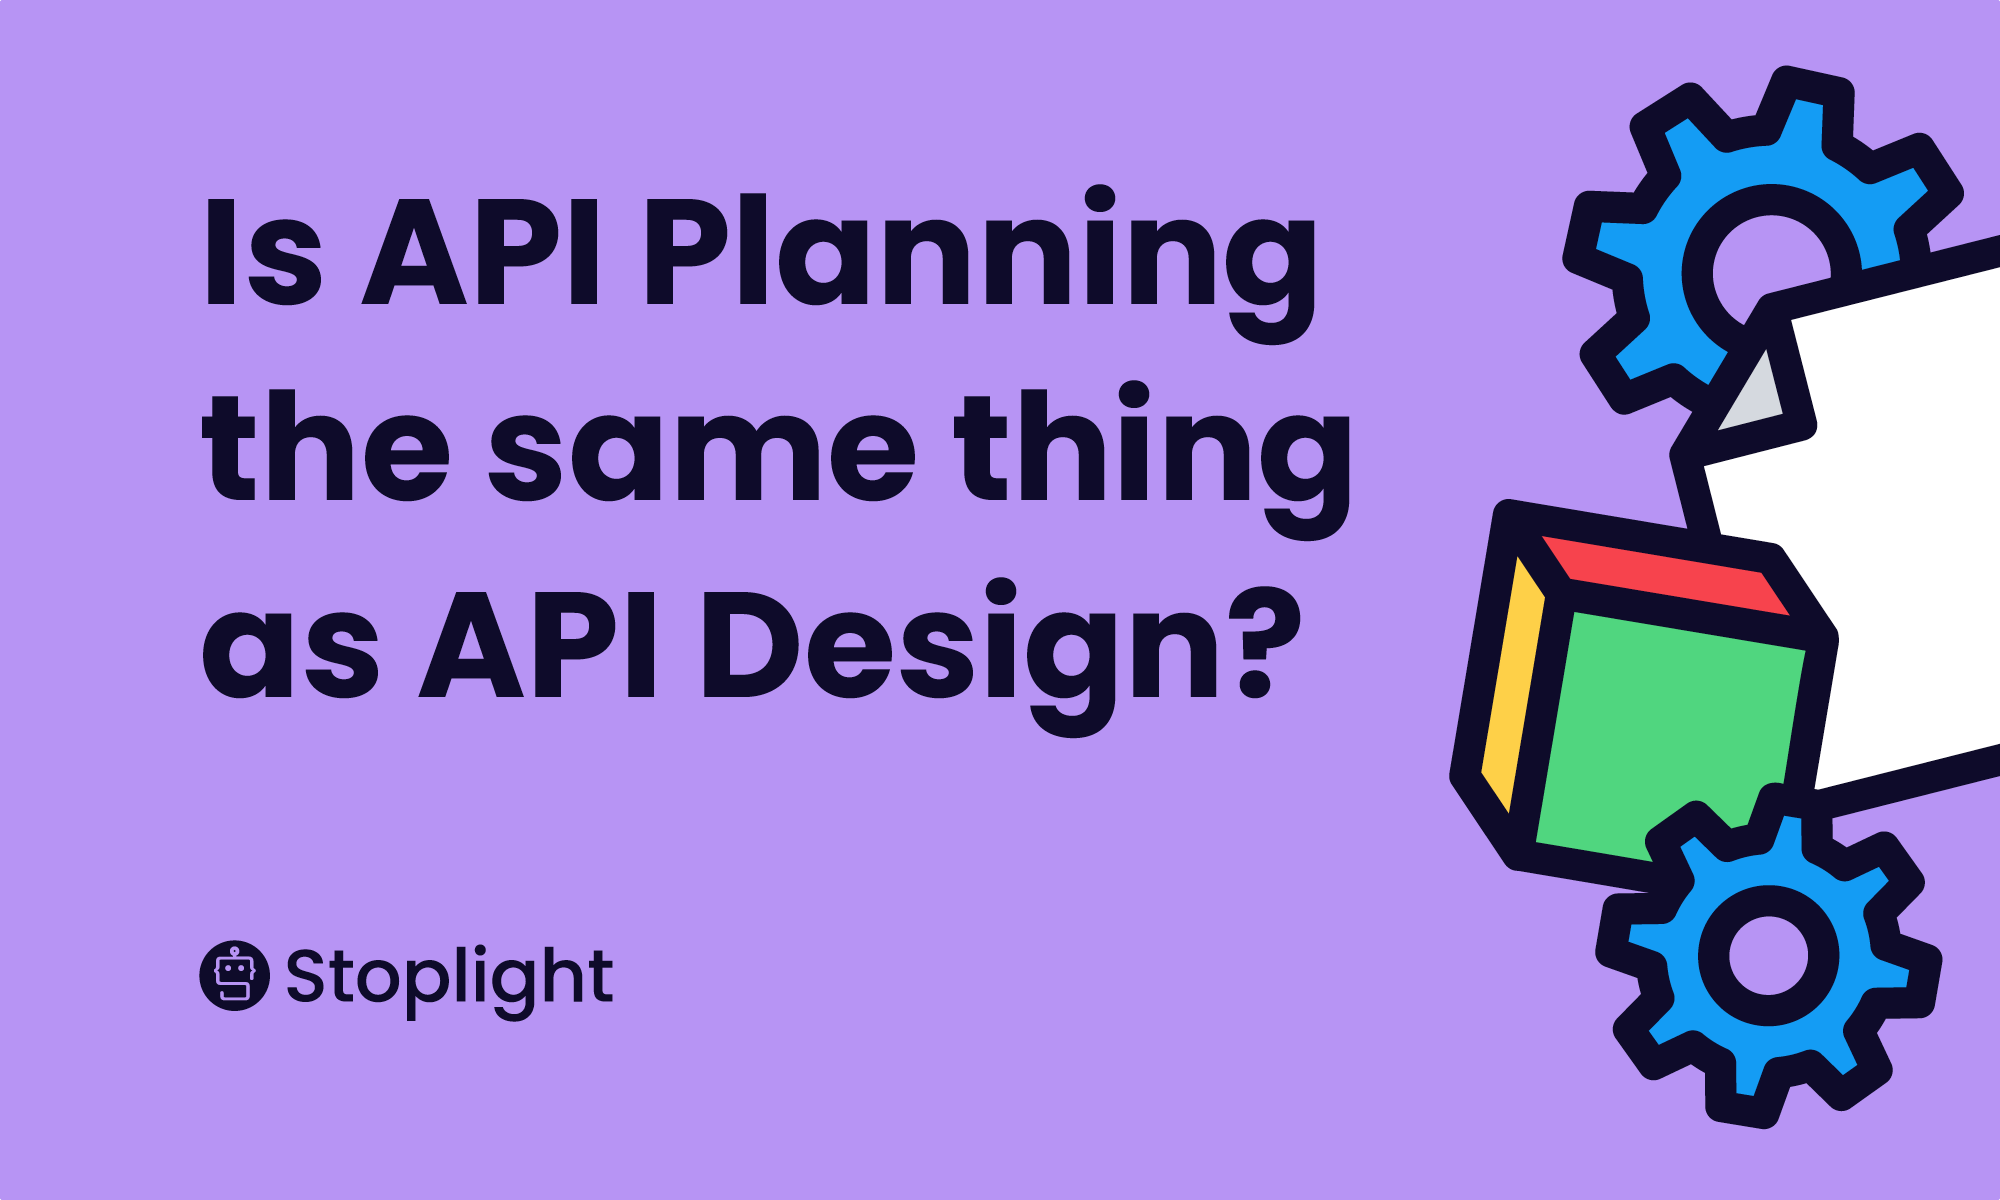 Is API Planning the same thing as API Design?